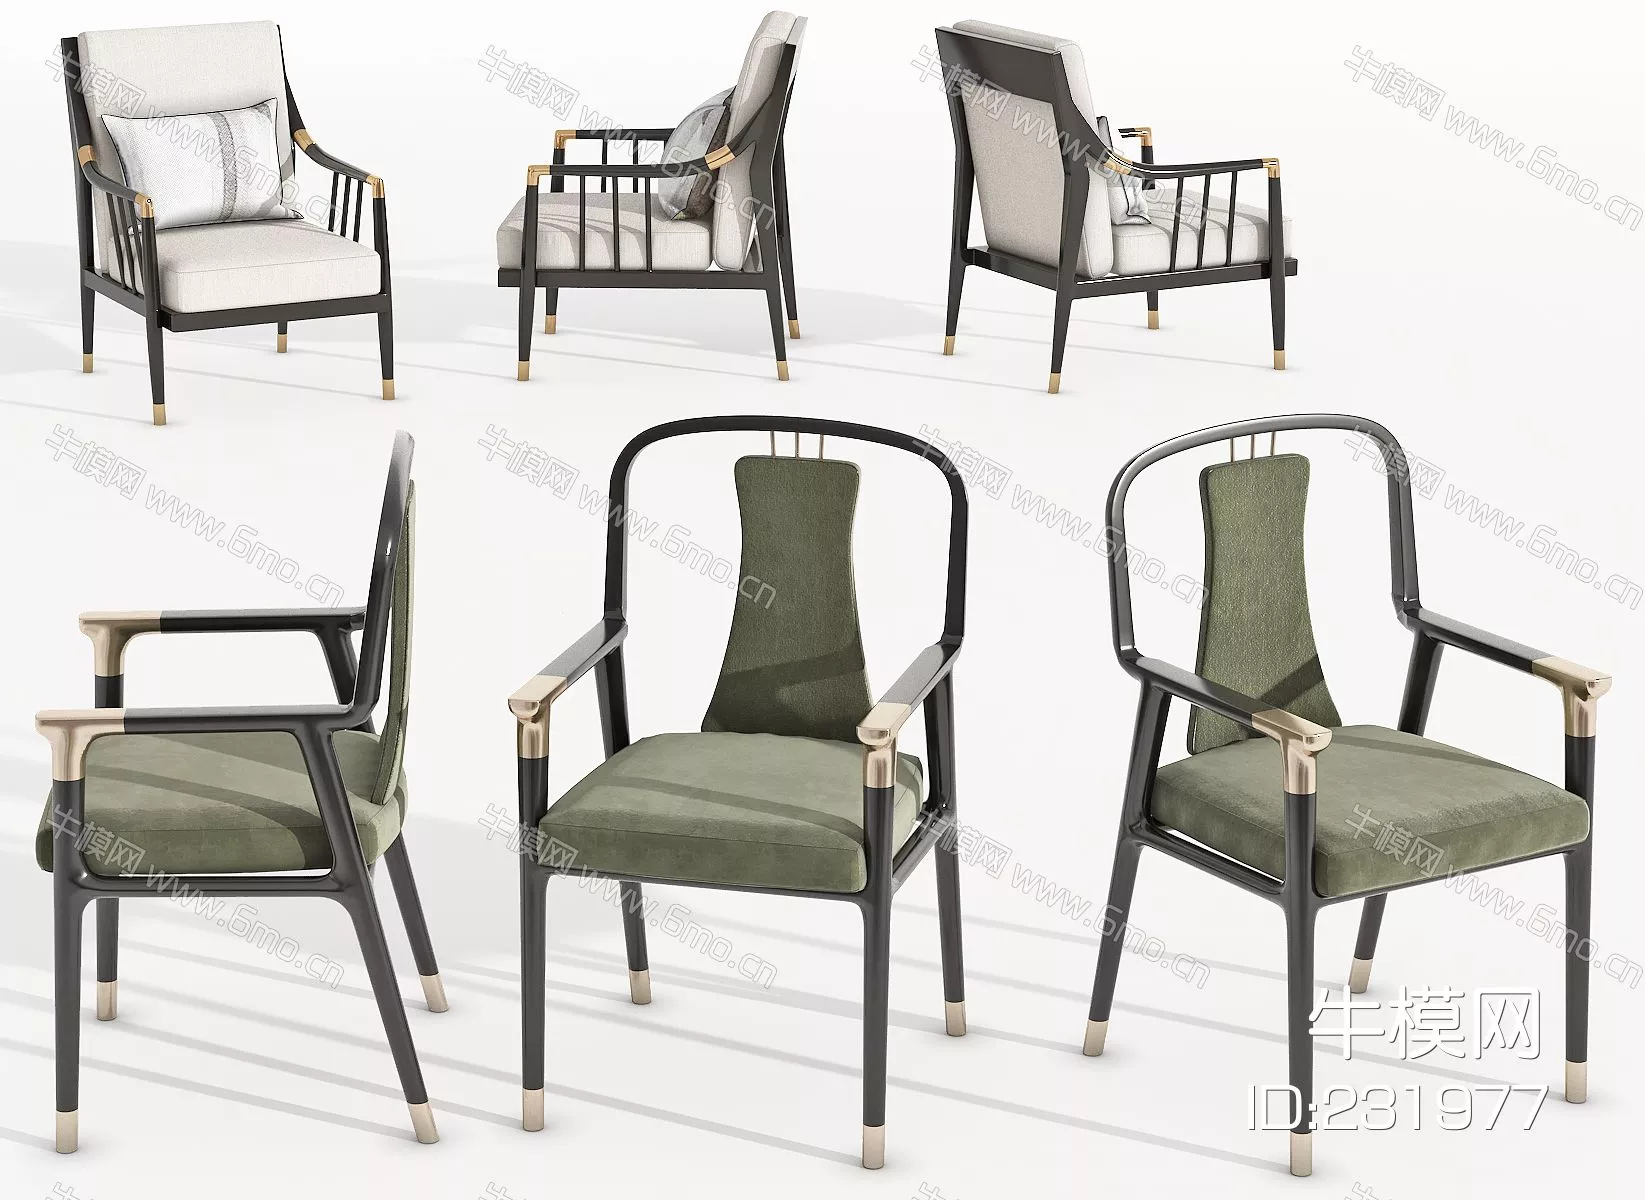 CHINESE LOUNGLE CHAIR - SKETCHUP 3D MODEL - VRAY - 231977